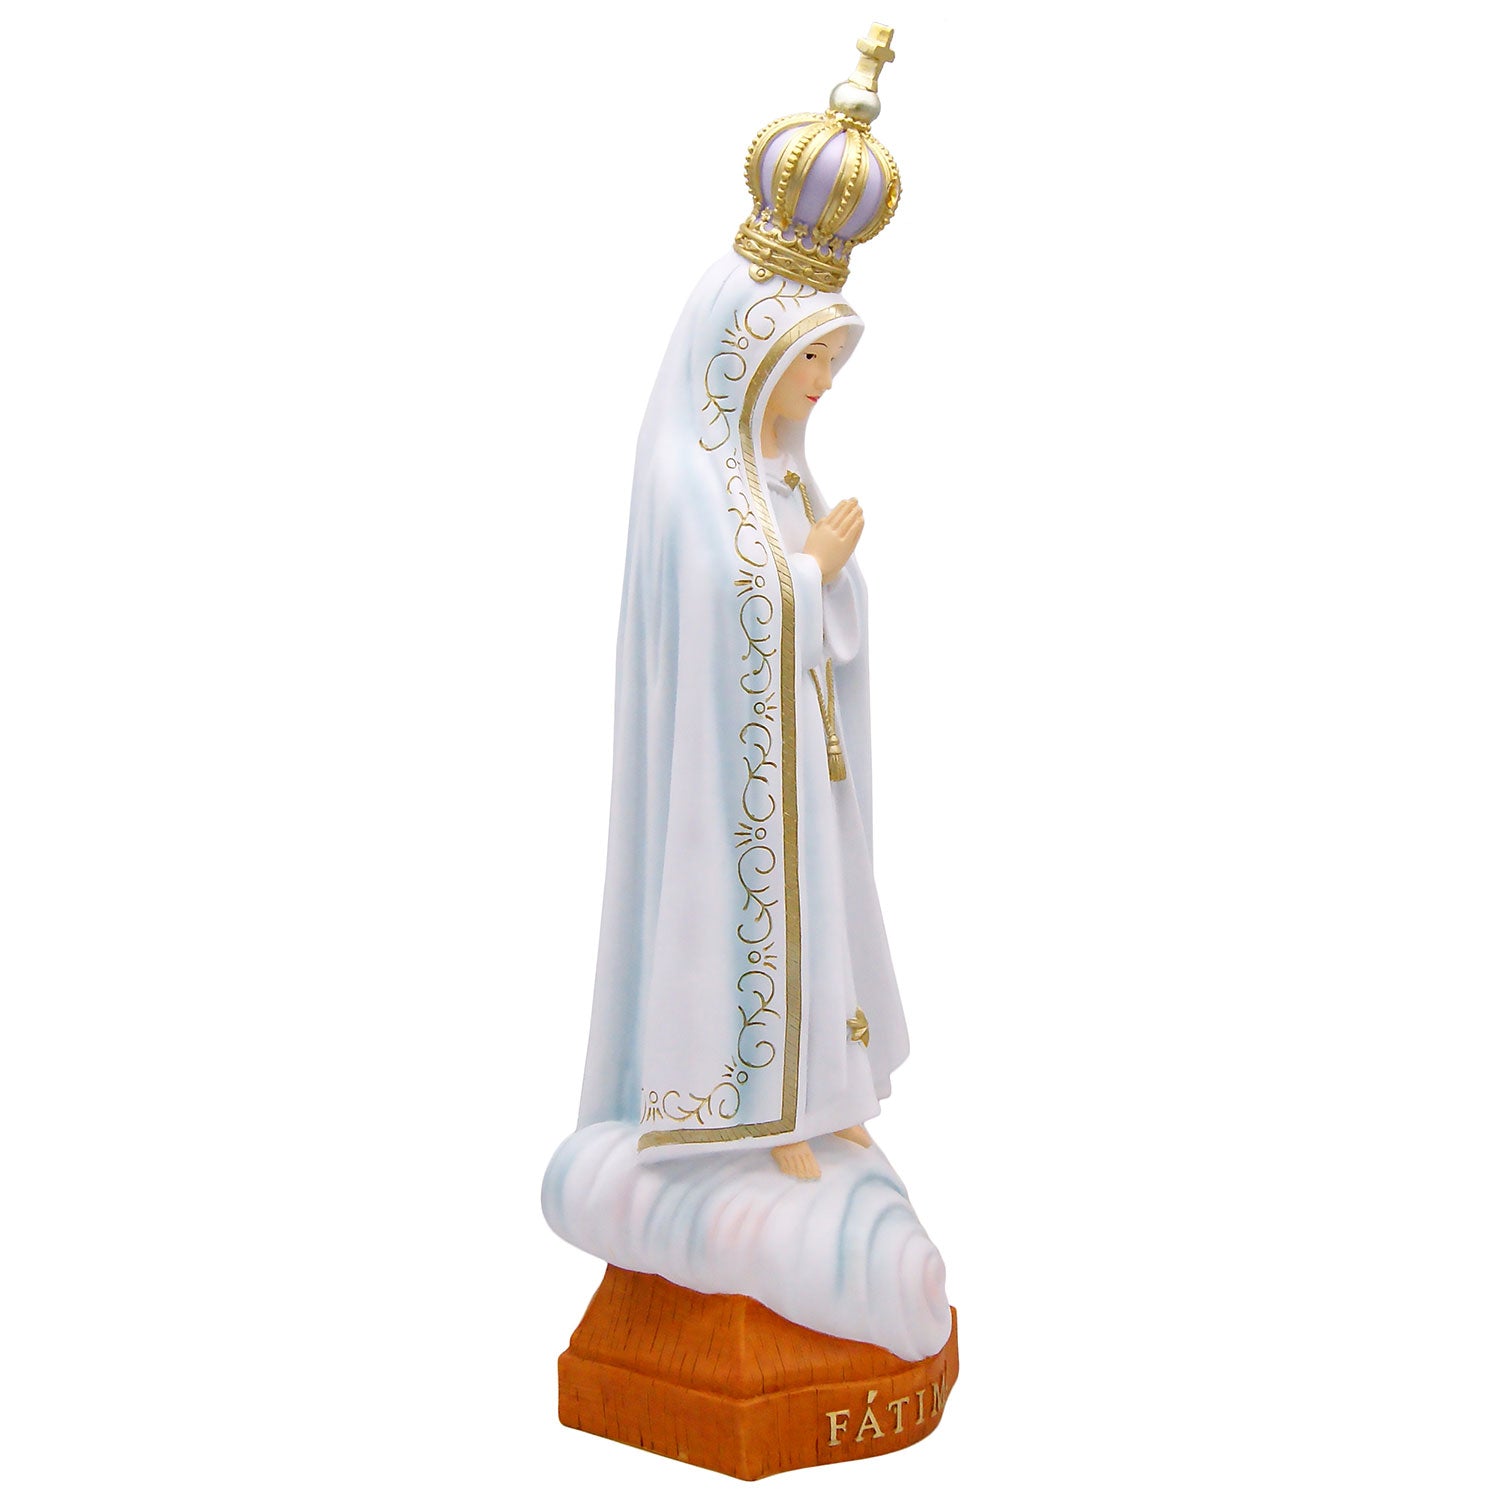 Our Lady of Fatima statue is made in Fatima, Portugal by the hands of the same artisans that craft the statues of the Shrine of Fatima. 